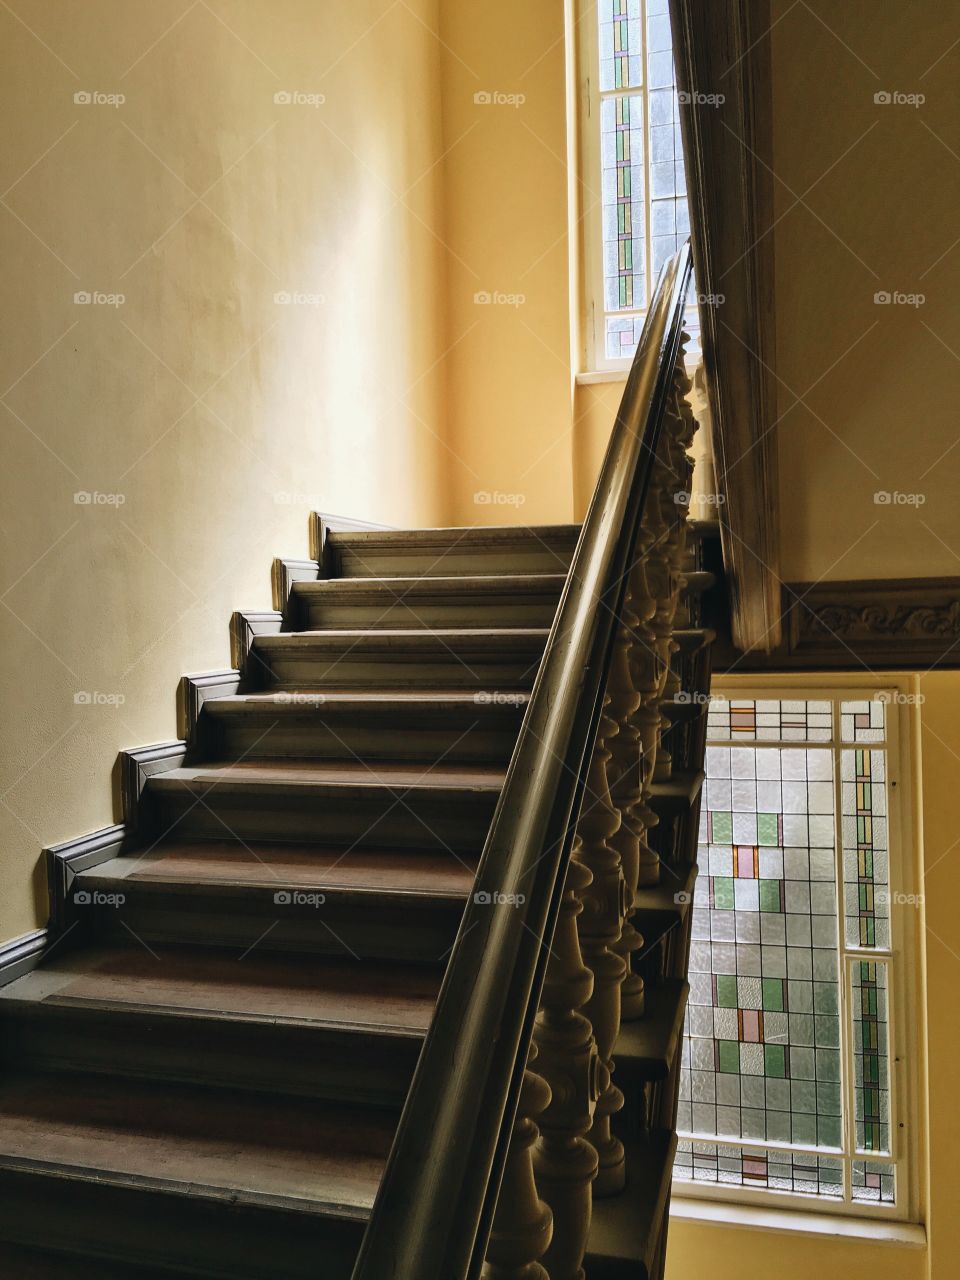 Stairway of mansion with light coming through window